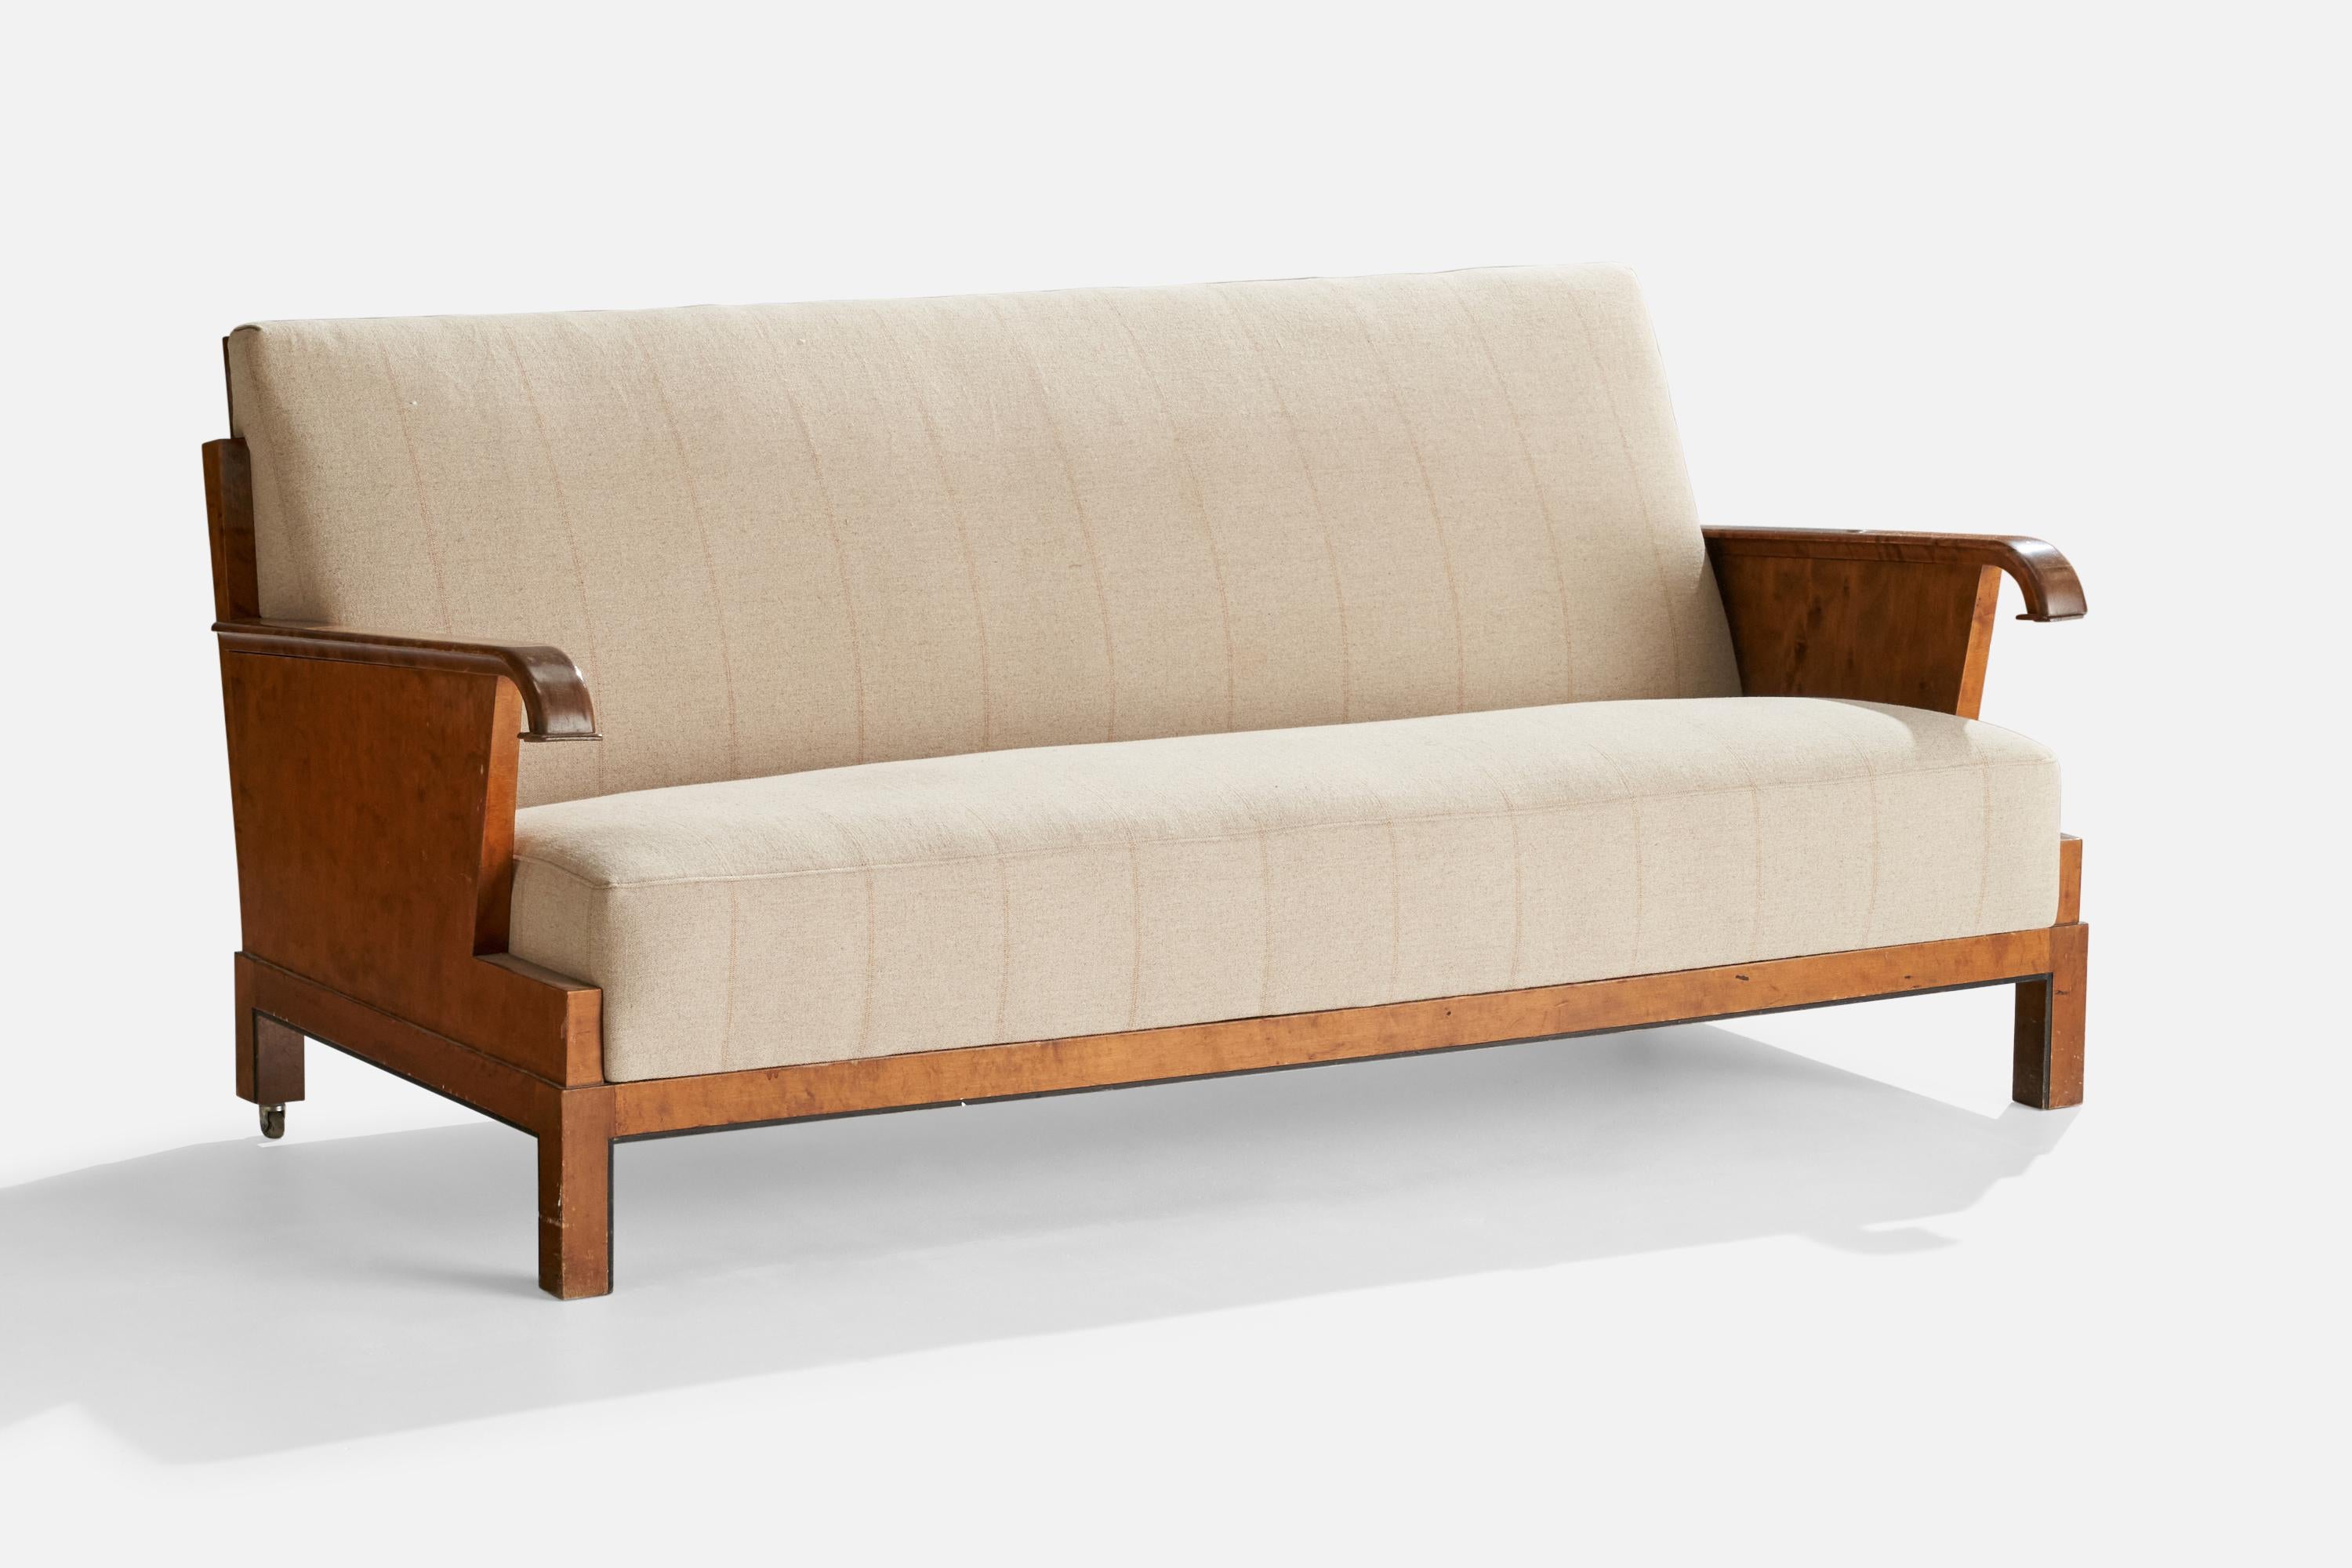 A birch, off-white fabric and metal sofa designed in Finland, 1930s.

Seat height 16”.